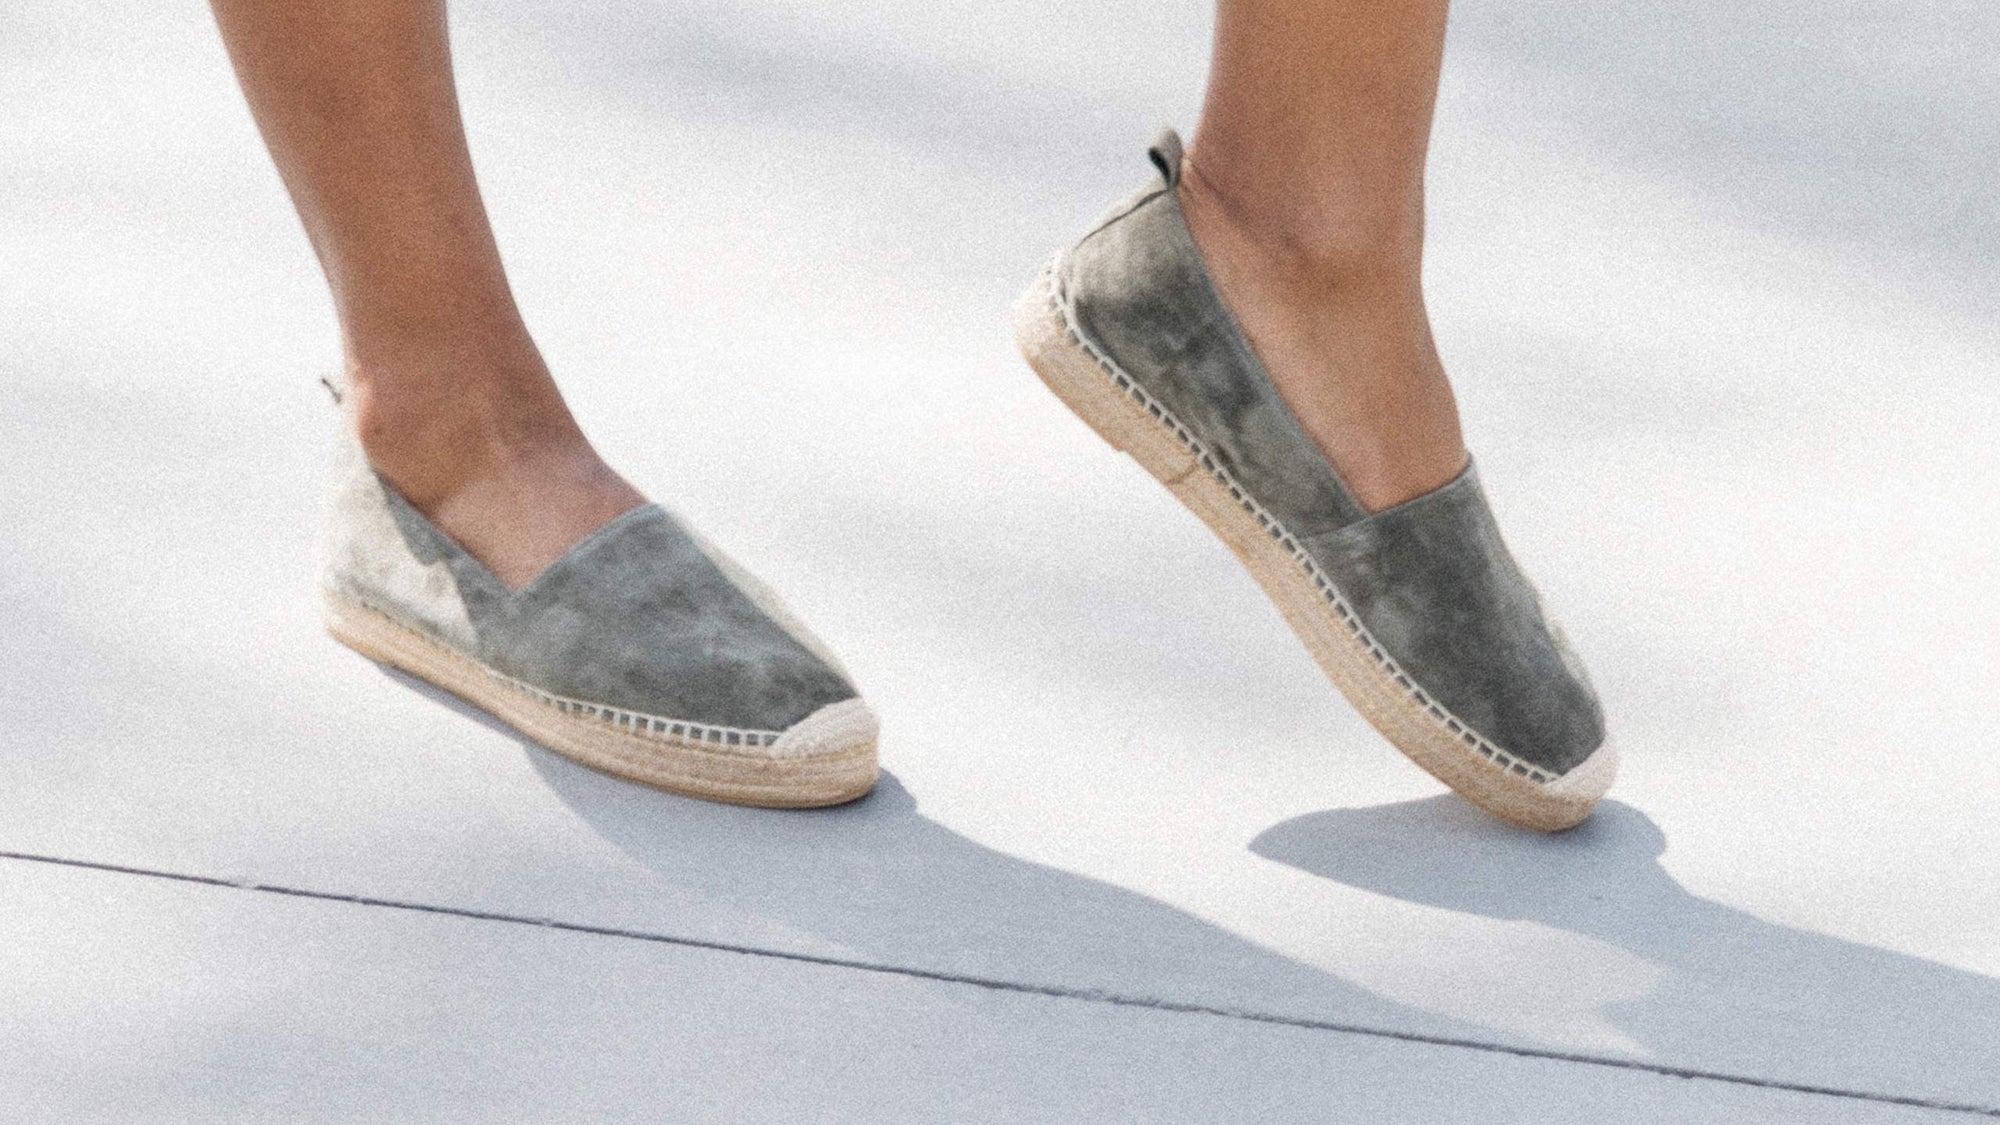 STYLE FOCUS: Enclosed Summer Flats